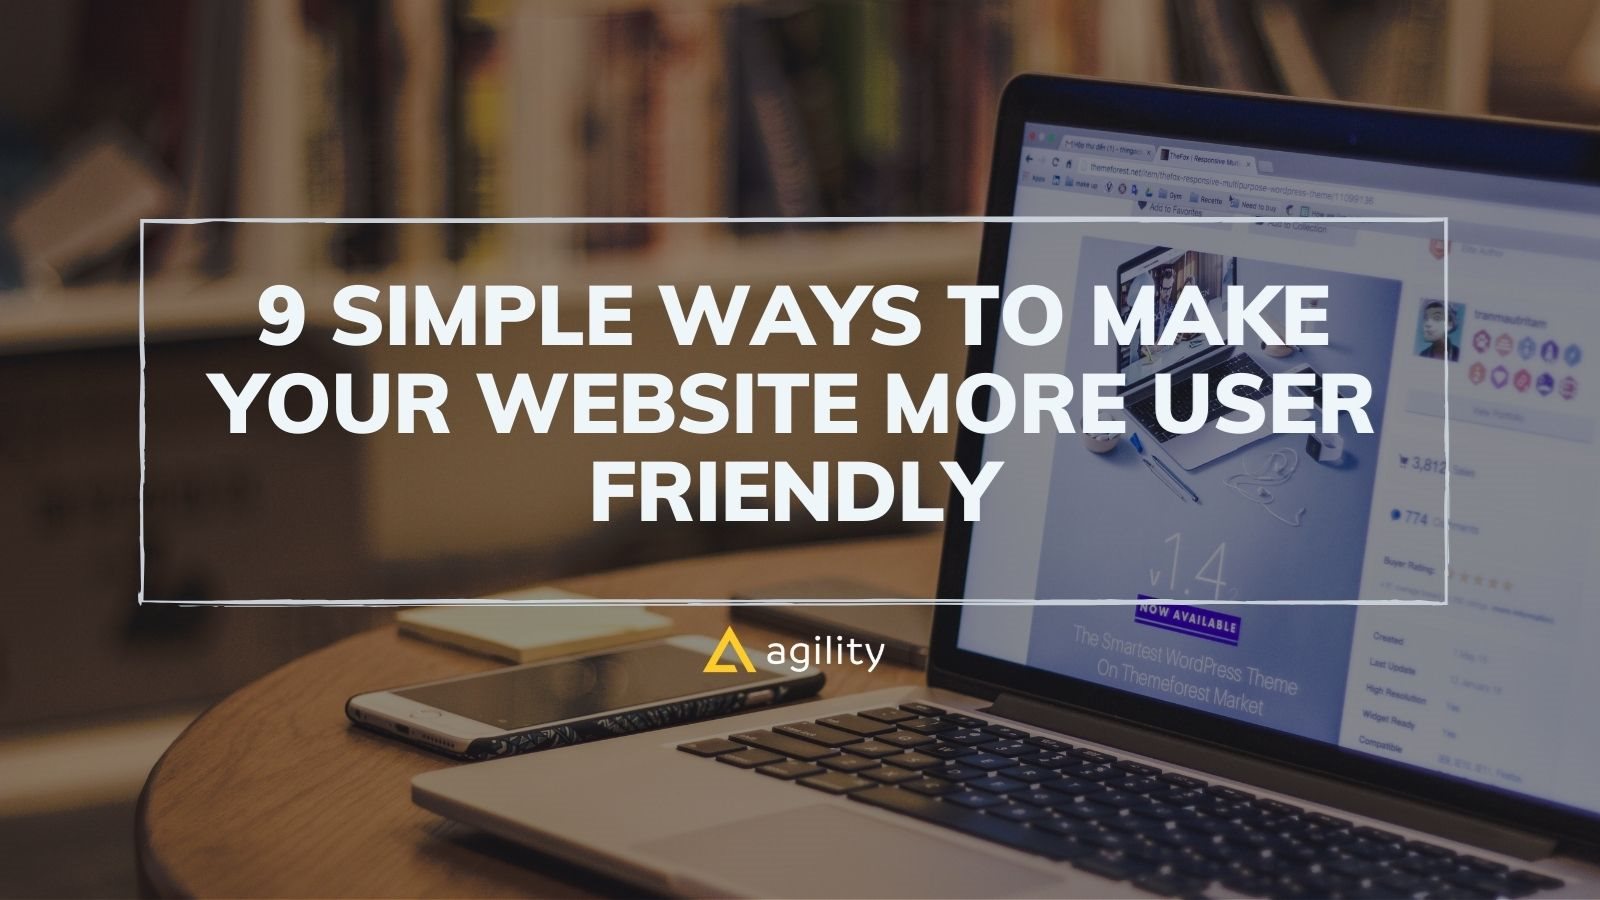 9 Simple Ways to Make Your Website More User Friendly